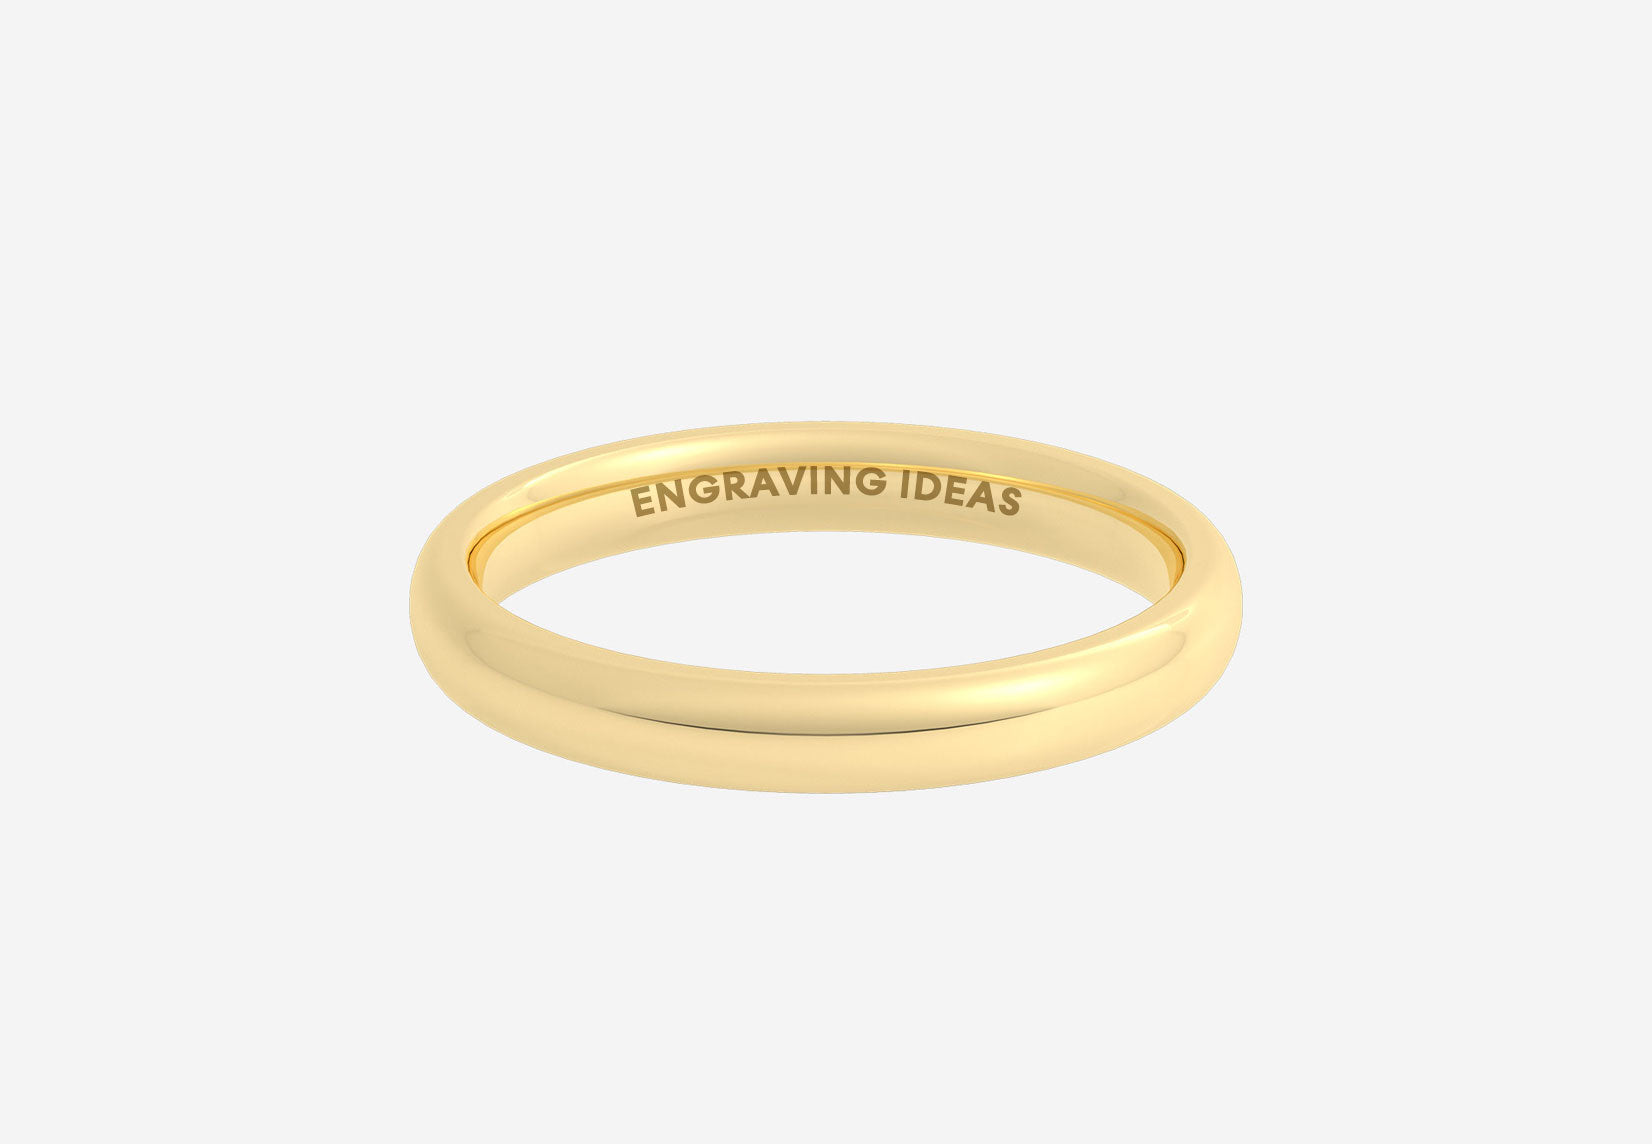 Engraving Ideas for Engagement Rings and Wedding Bands